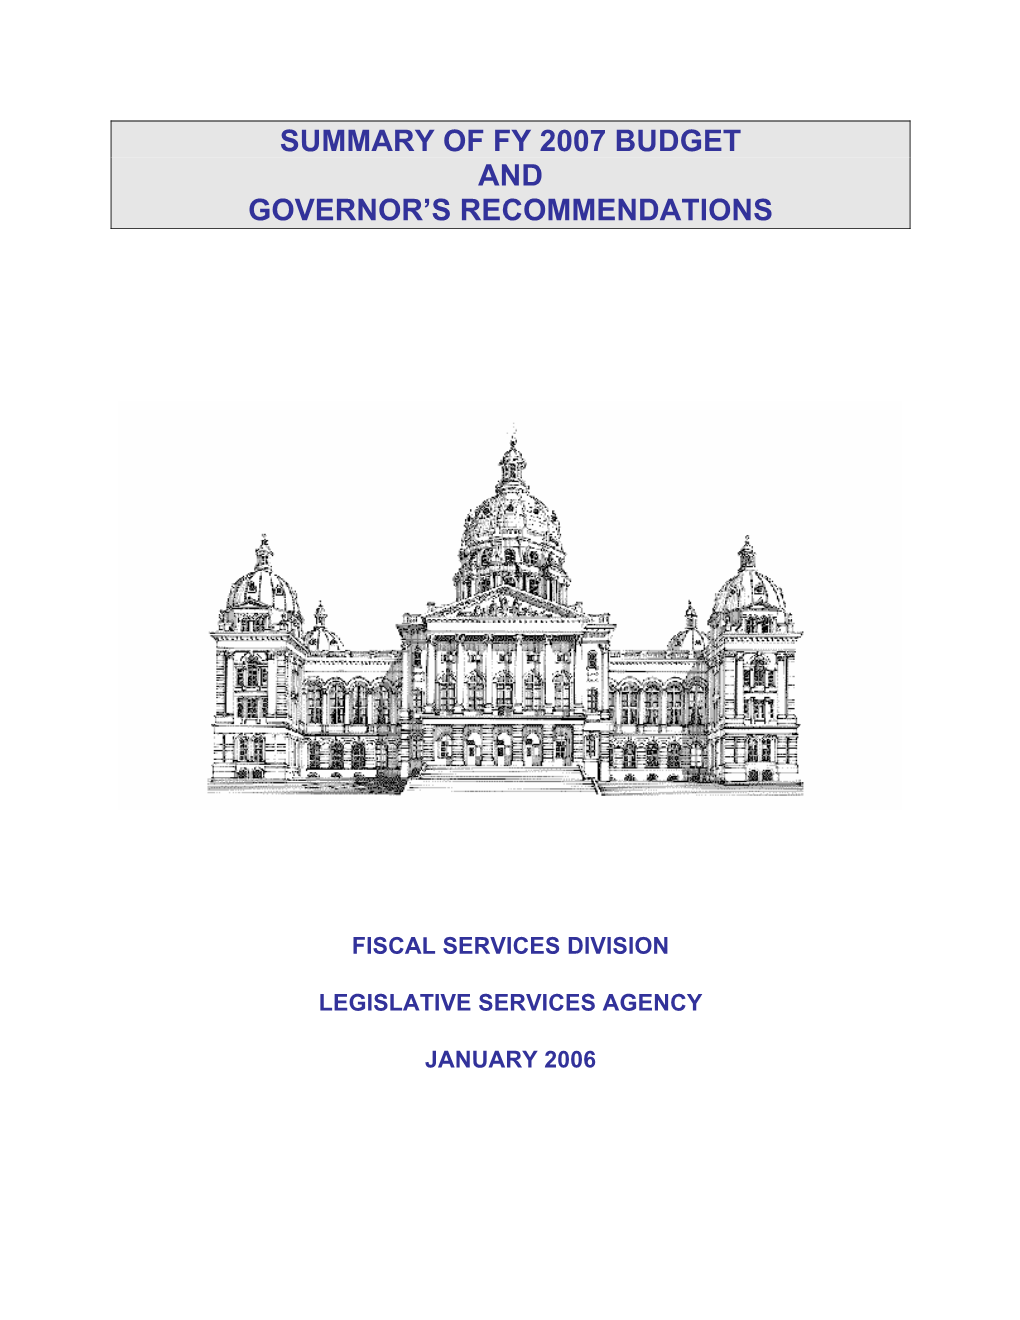 Fy 2007 Budget and Governor’S Recommendations